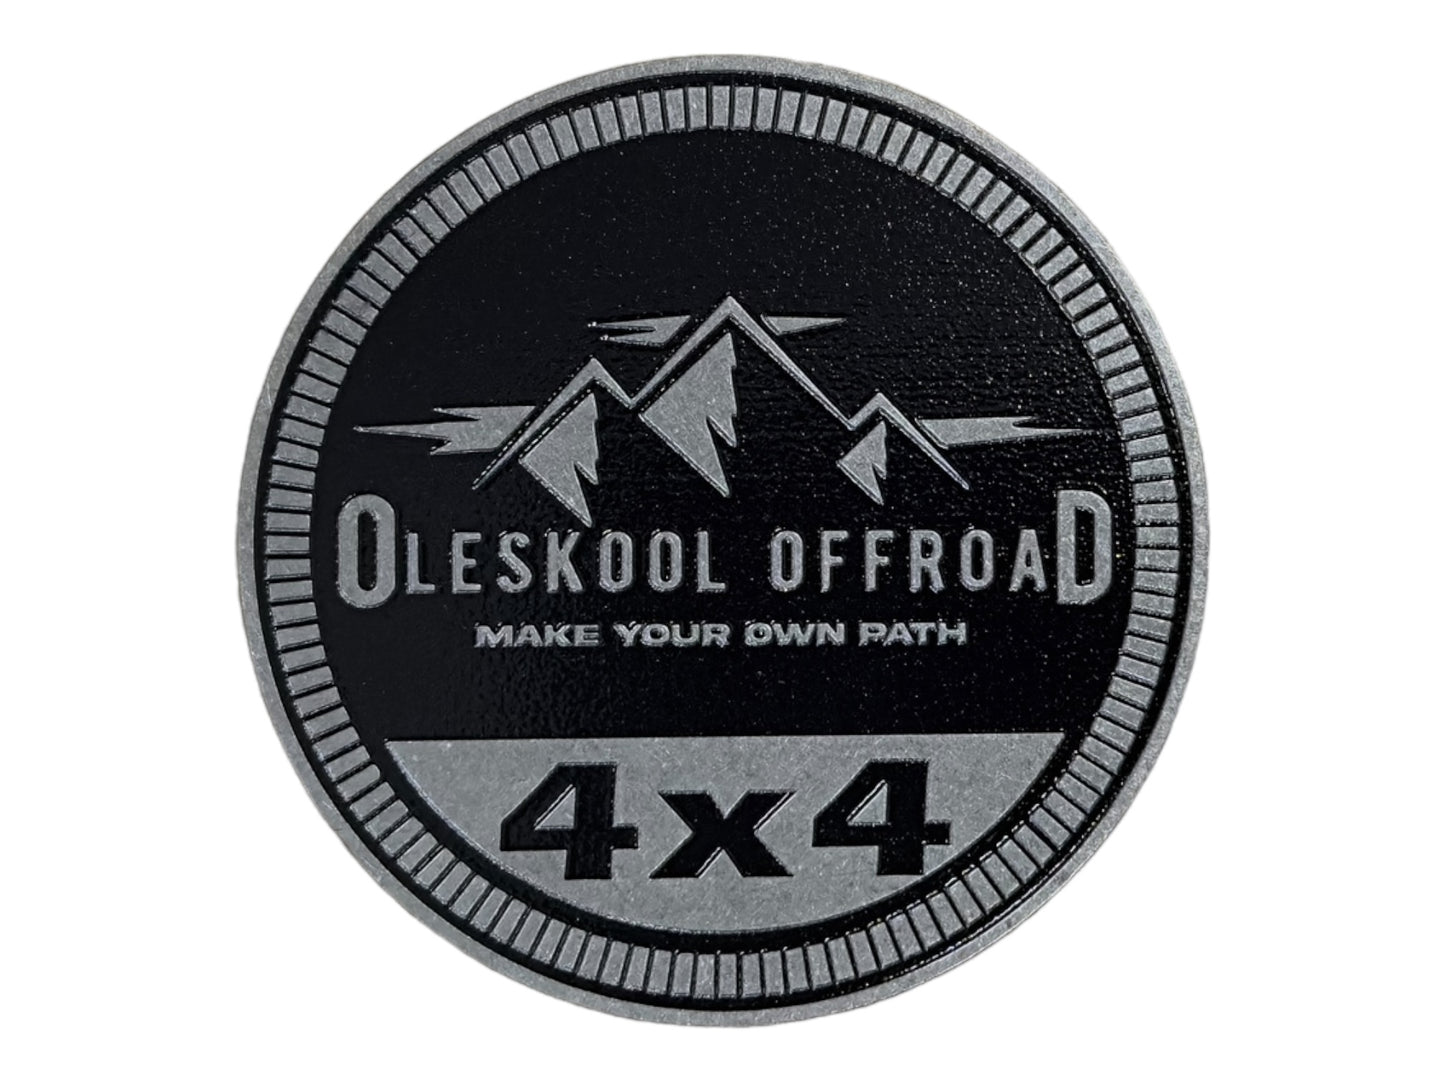 Badge - Oleskool Offroad (Multiple Colors Available)